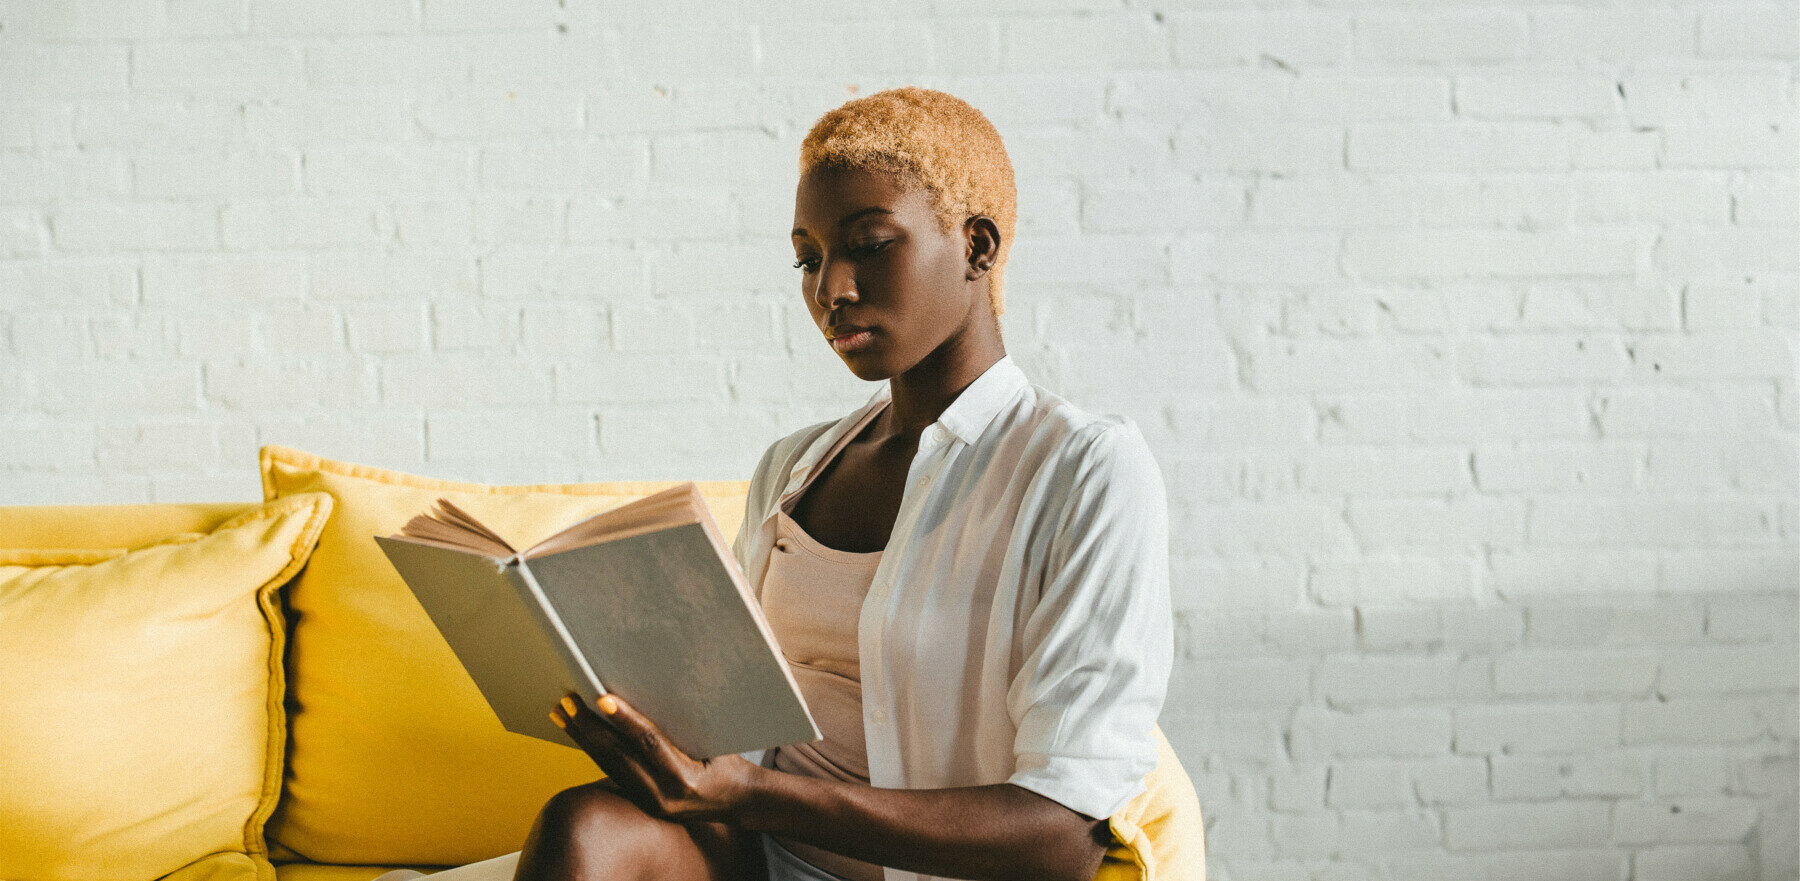 woman reading on couch with cool hair and excellent posture